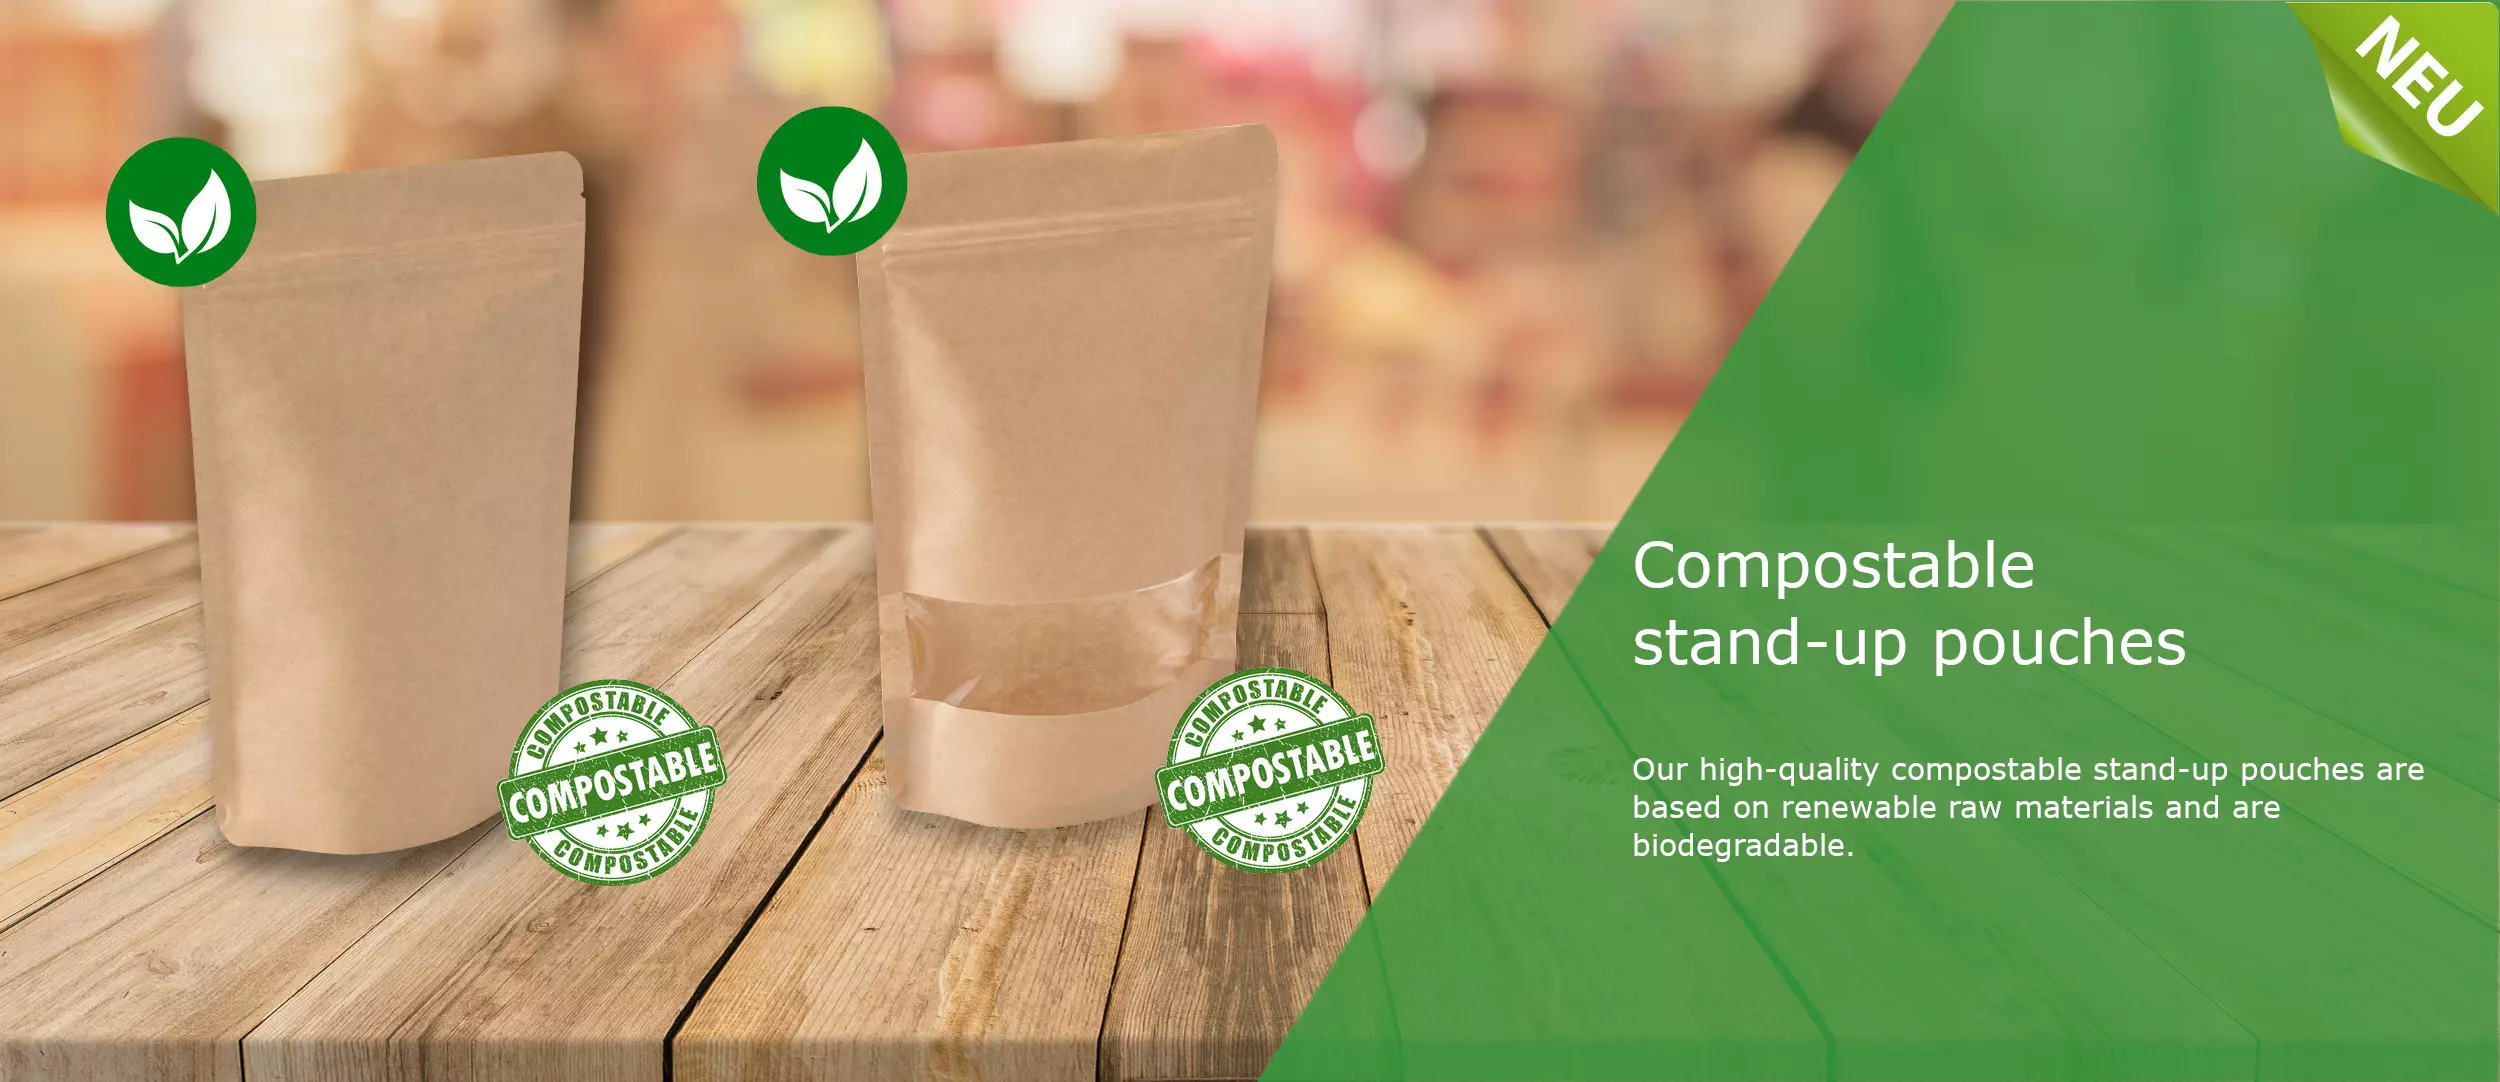 Compostable stand-up pouches